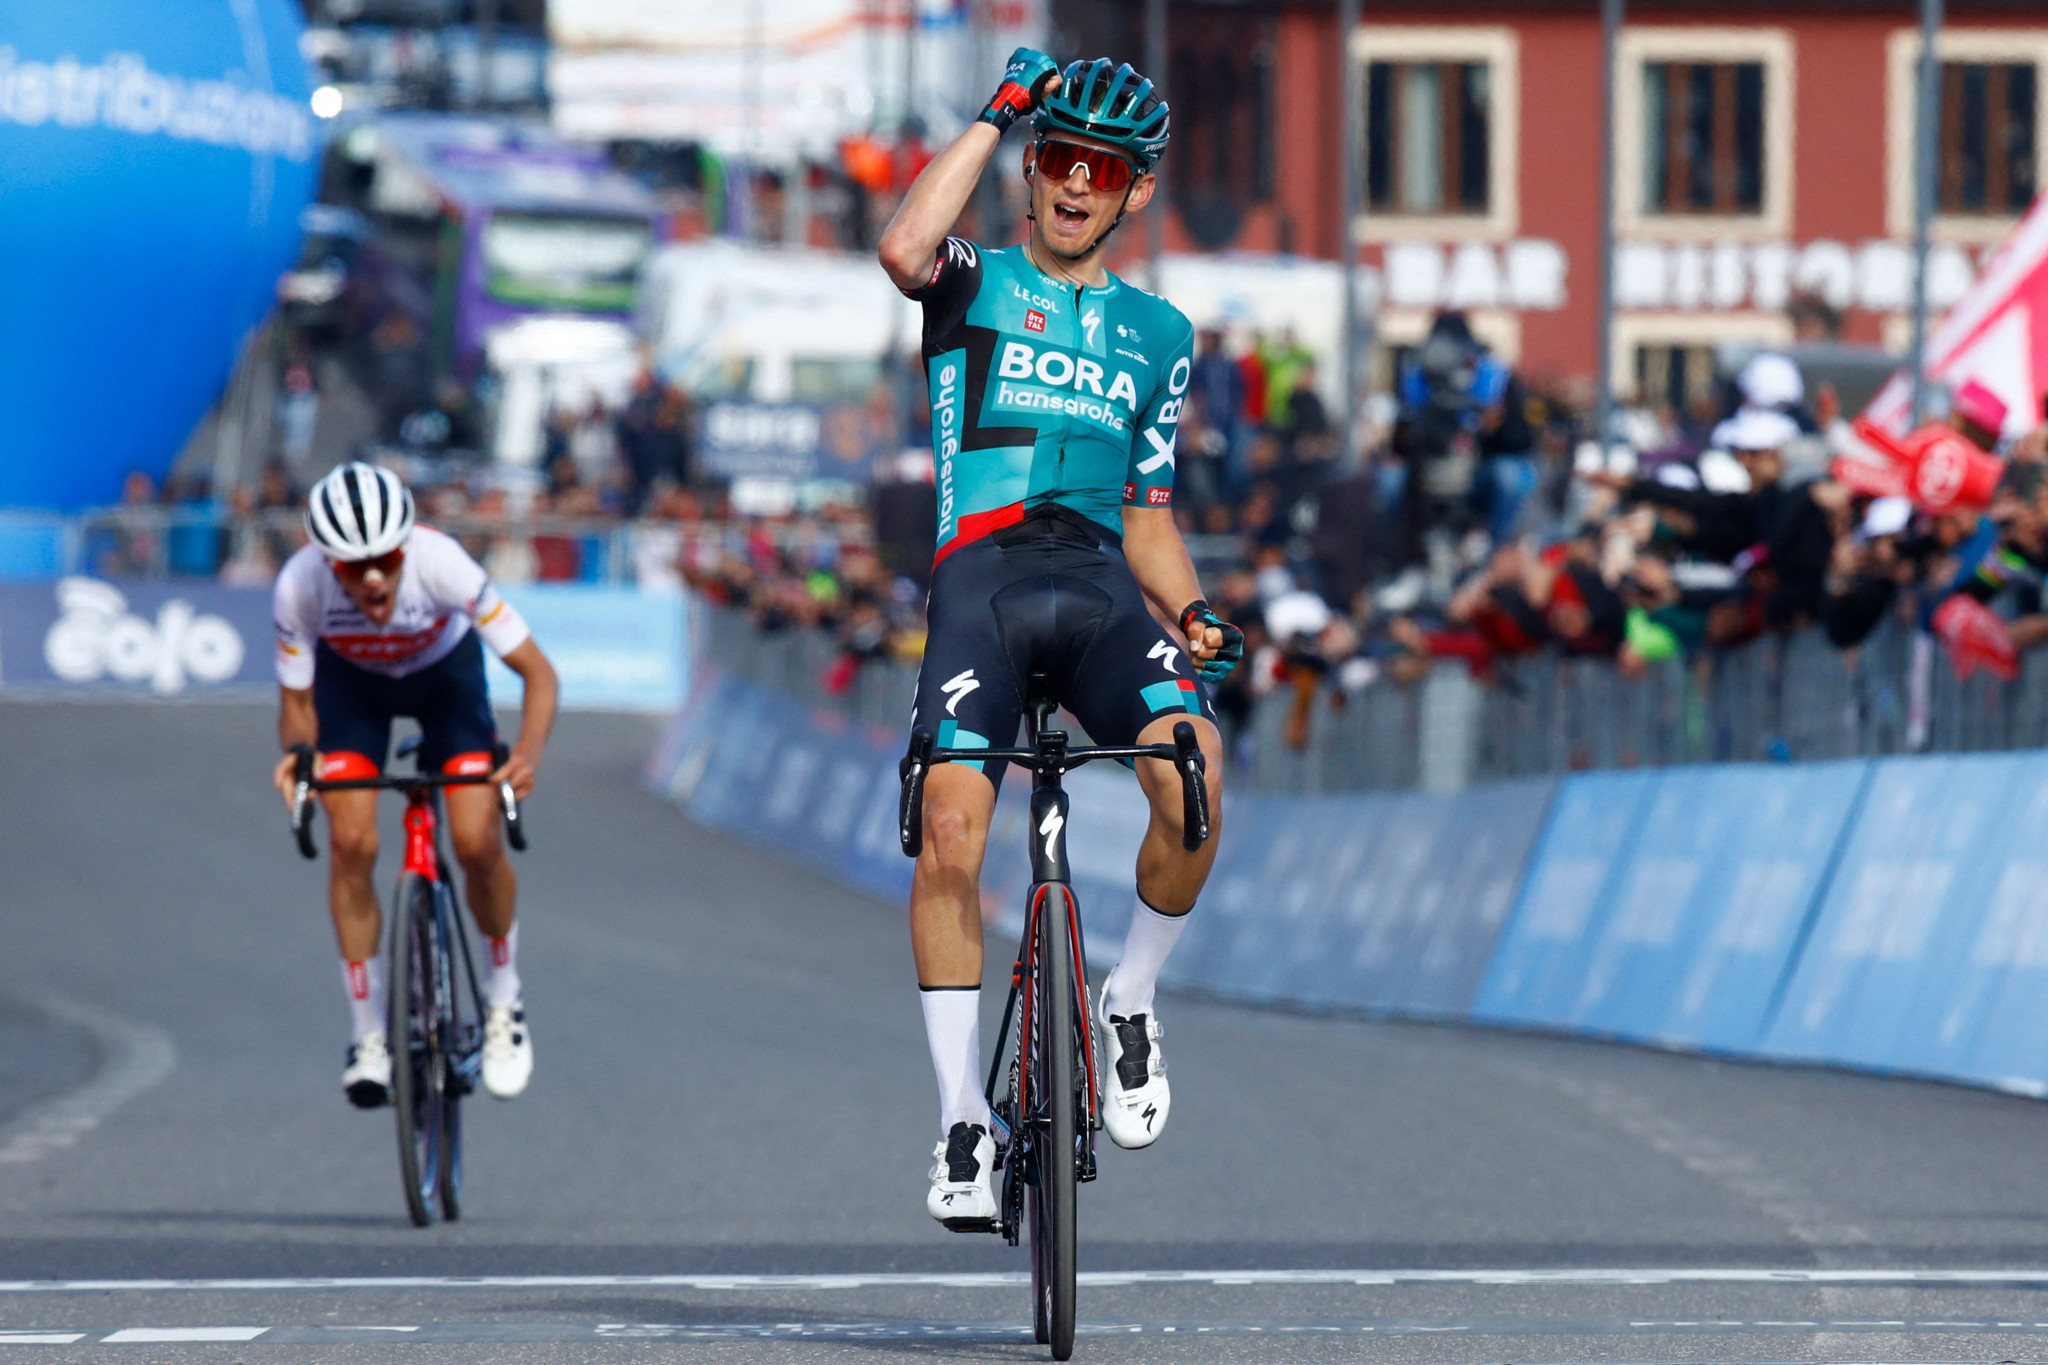 Kämna wins stage four and López takes overall lead at Giro d'Italia